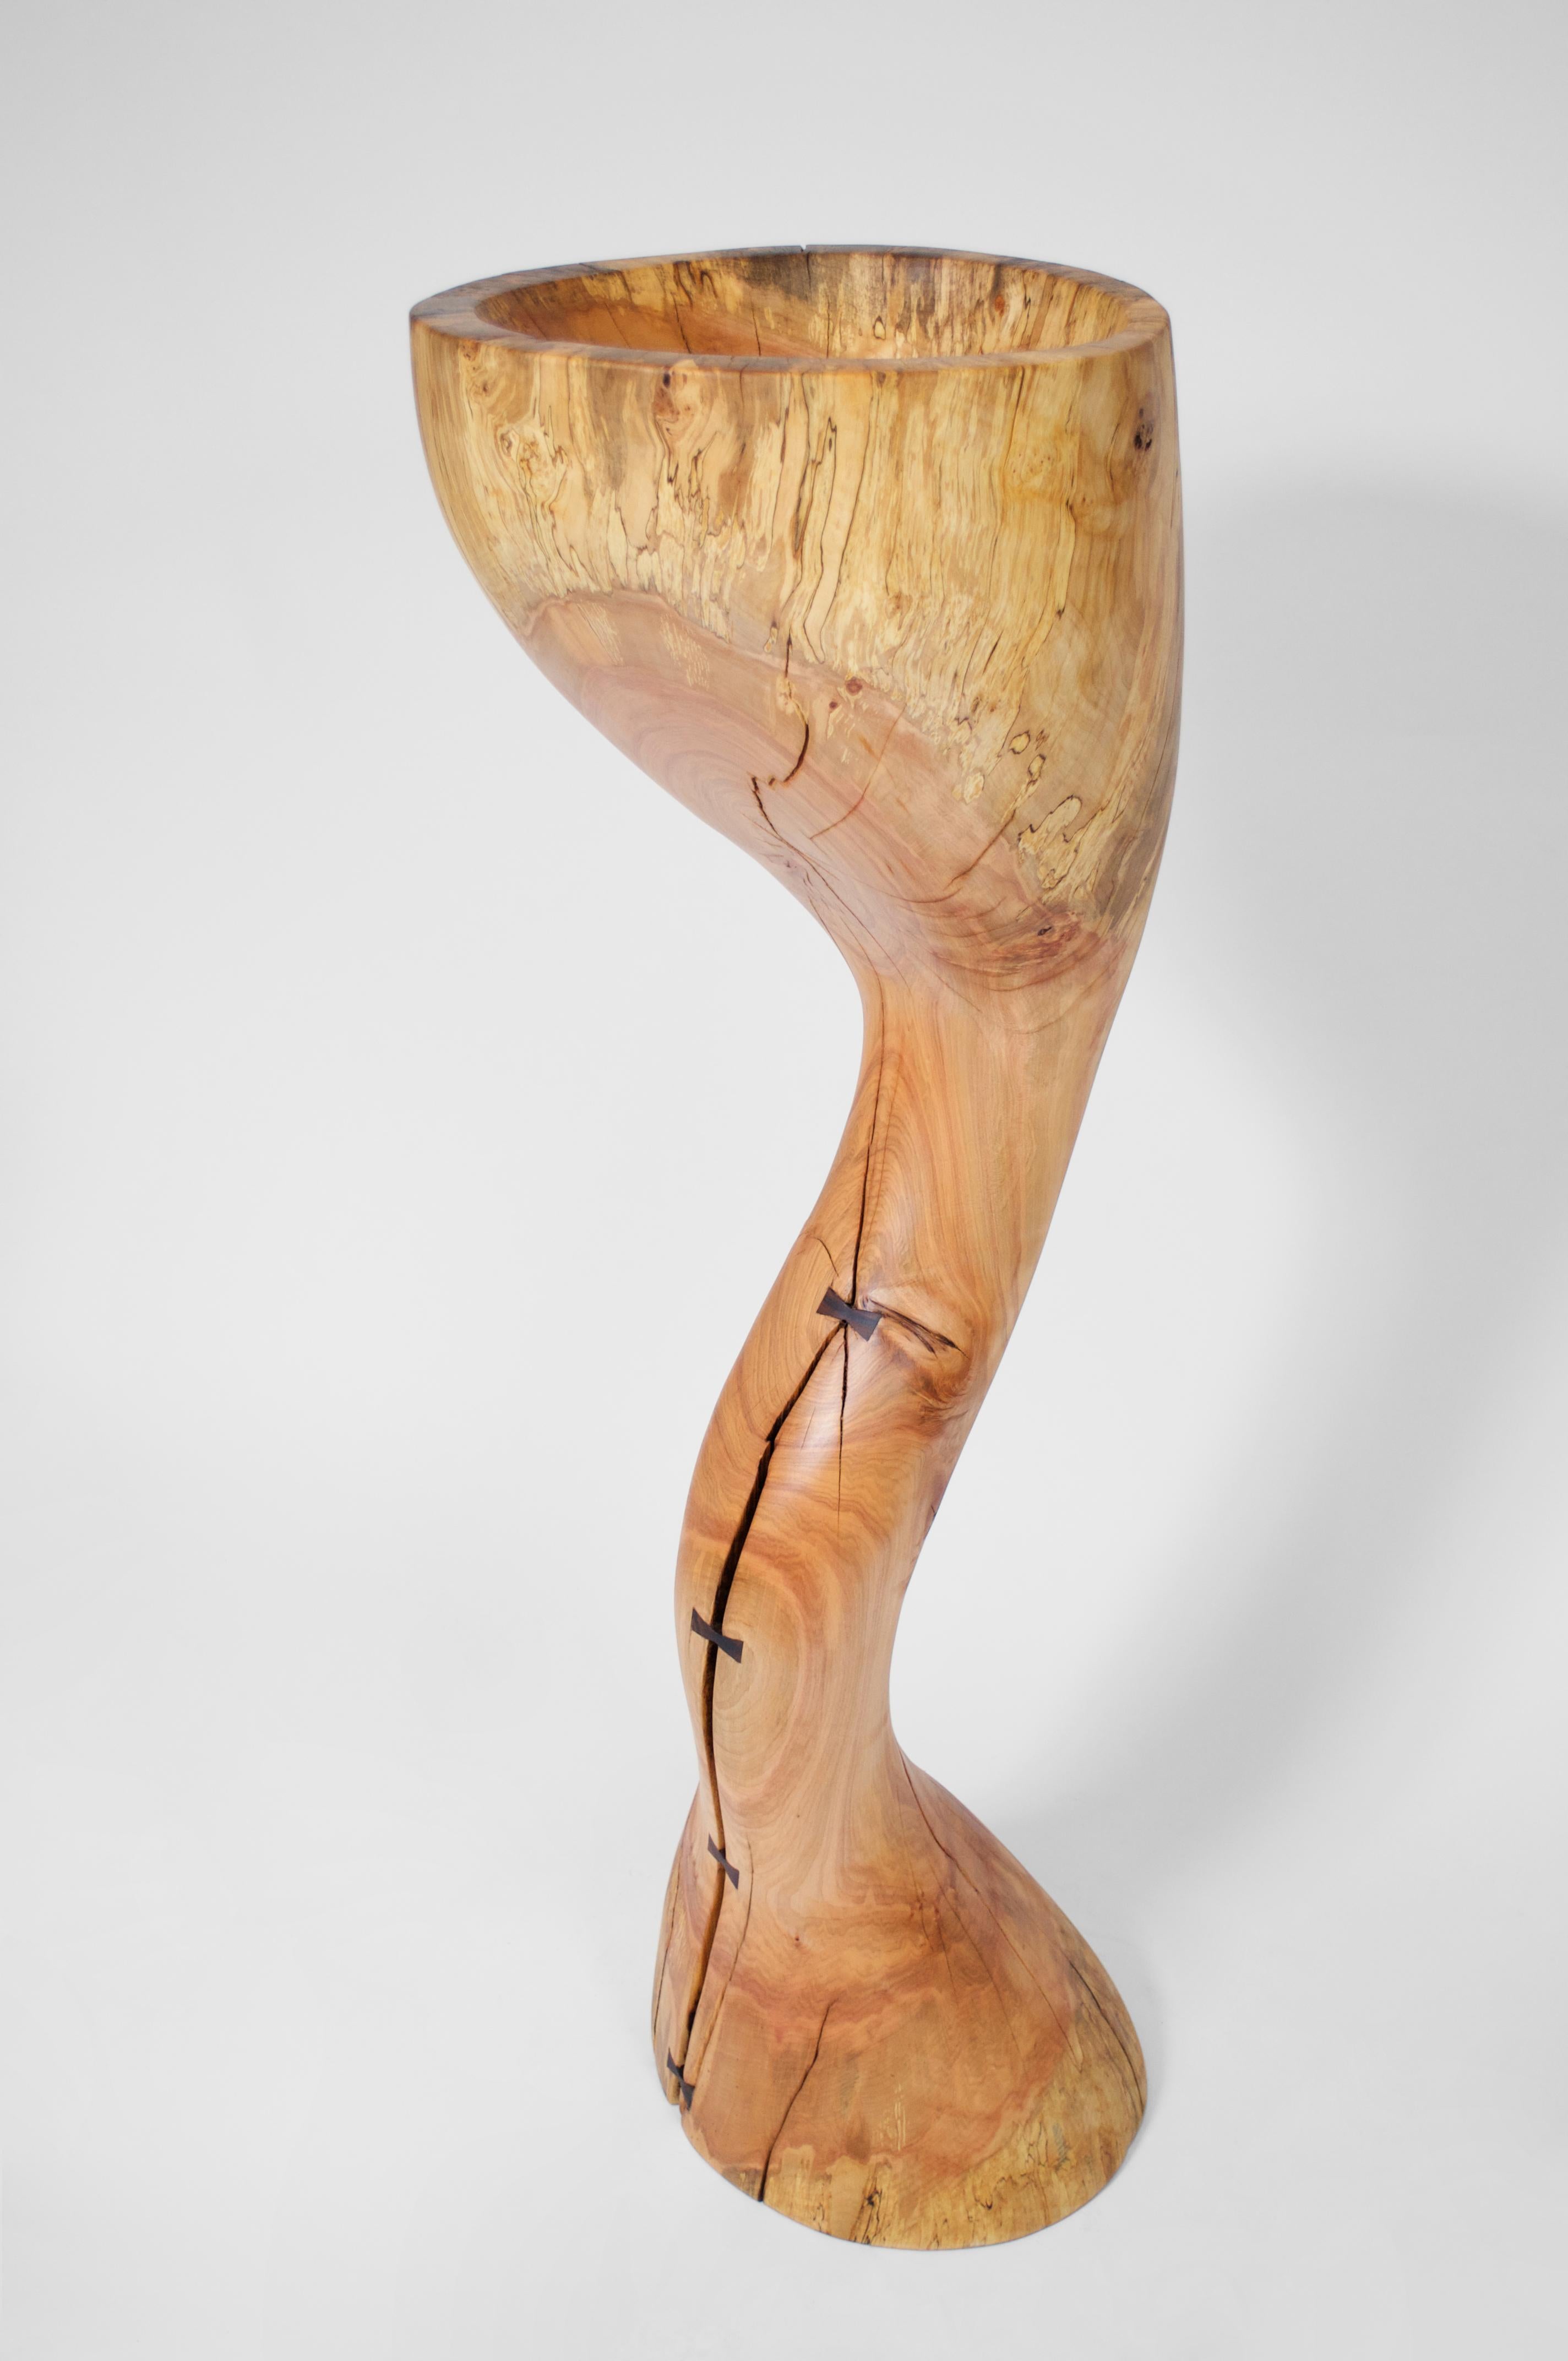 Vessel 1305 by Jörg Pietschmann
Dimensions: D 46 x W 47 x H 143 cm 
Materials: Norway maple. 
Finish: polished oil finish.


Made from a strongly curved main branch of an old maple tree.
In Pietschmann’s sculptures, trees that for centuries were